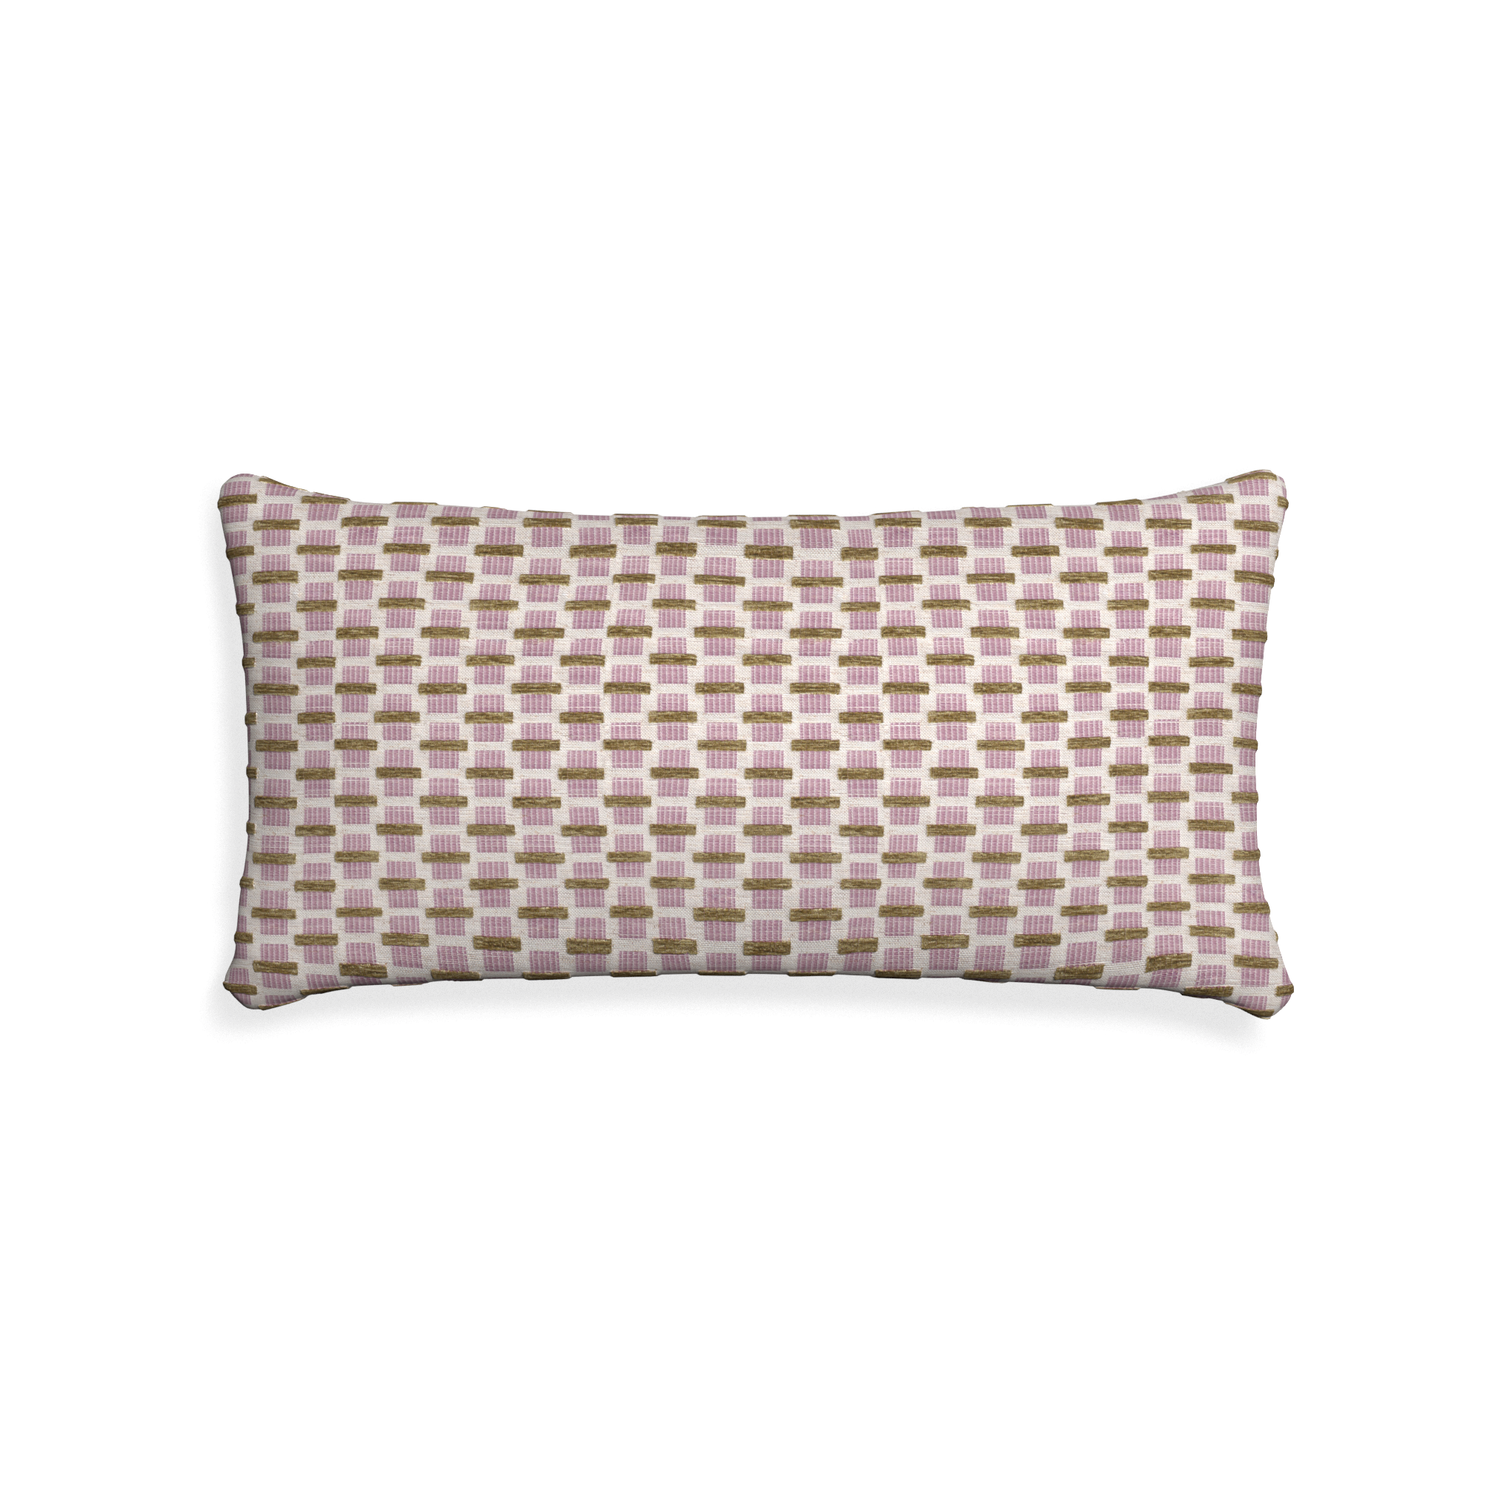 Midi-lumbar willow orchid custom pink geometric chenillepillow with none on white background